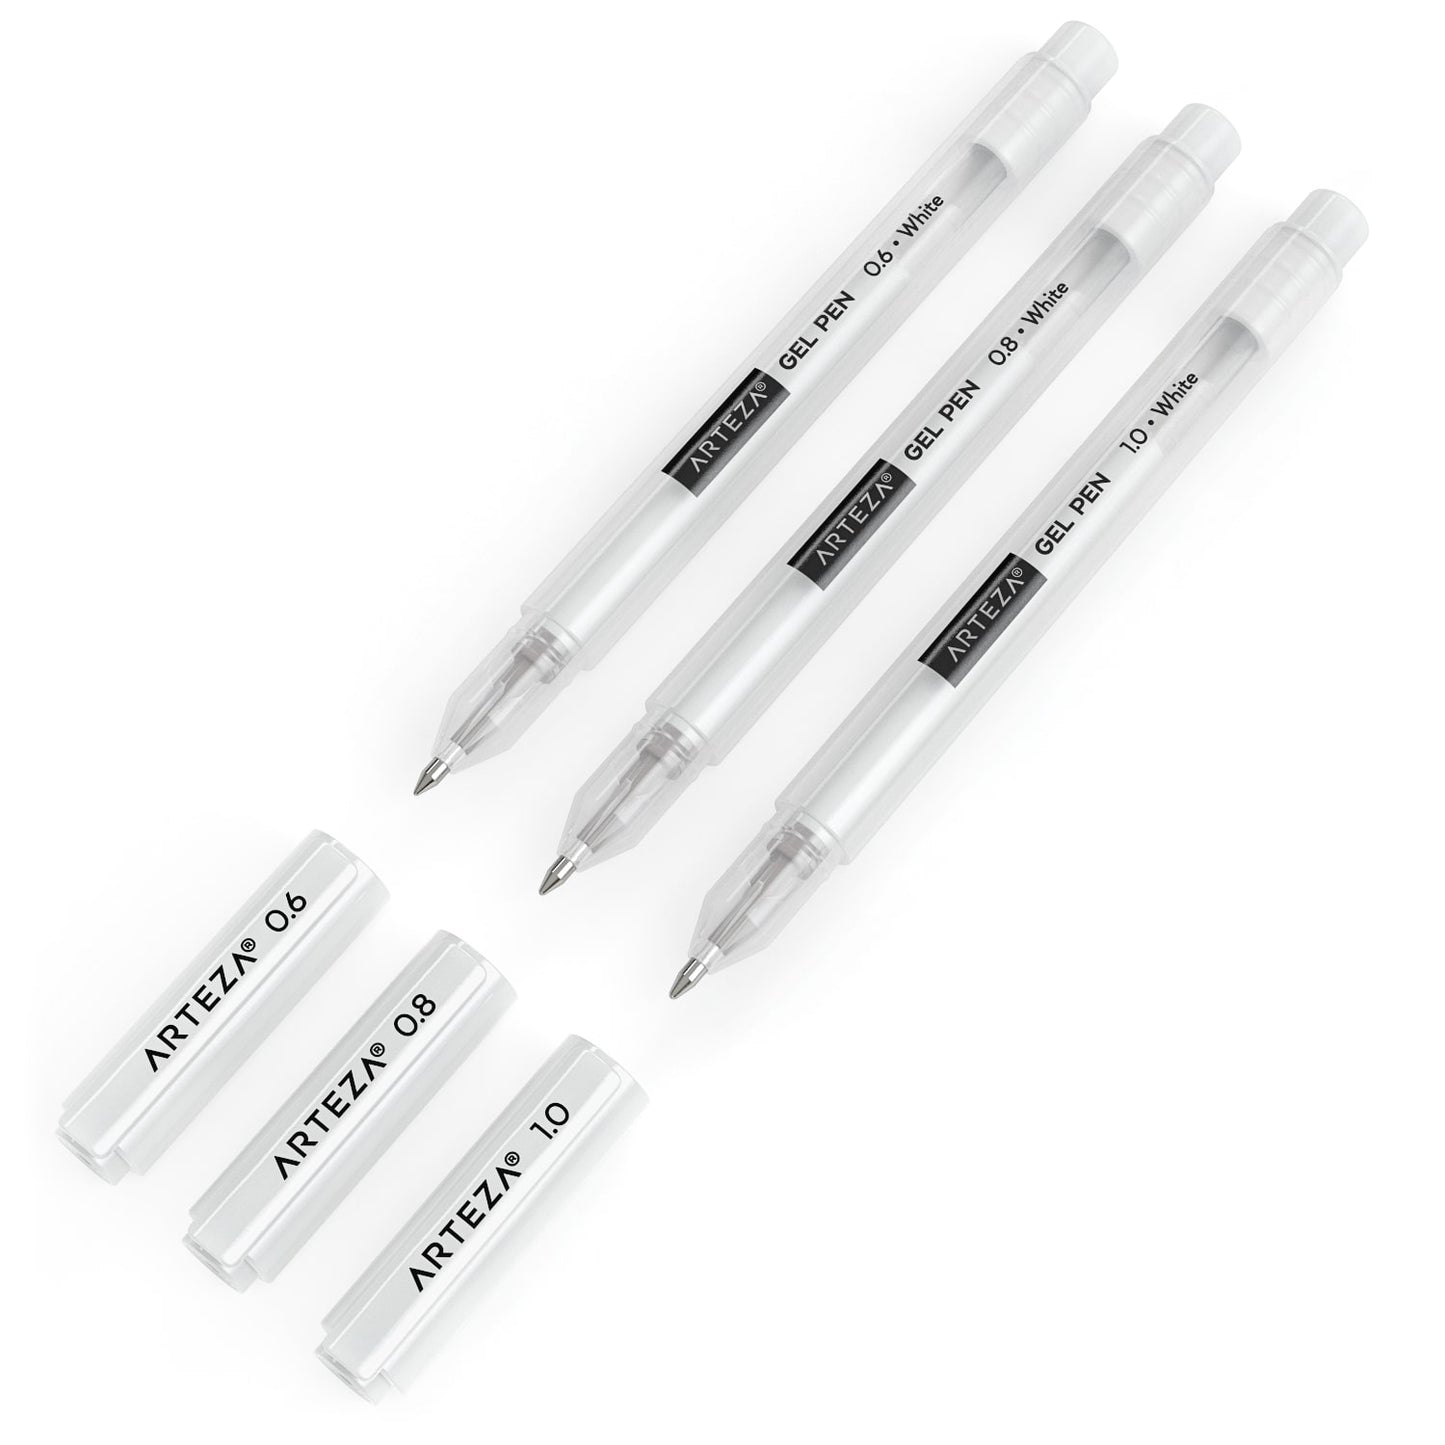 ARTEZA White Gel Pen Set, Pack of 12, White Gel Pens for Artists with  0.6mm, 0.8mm, and 1.00 mm Nibs, White Rollerball Pens for Writing, Drawing